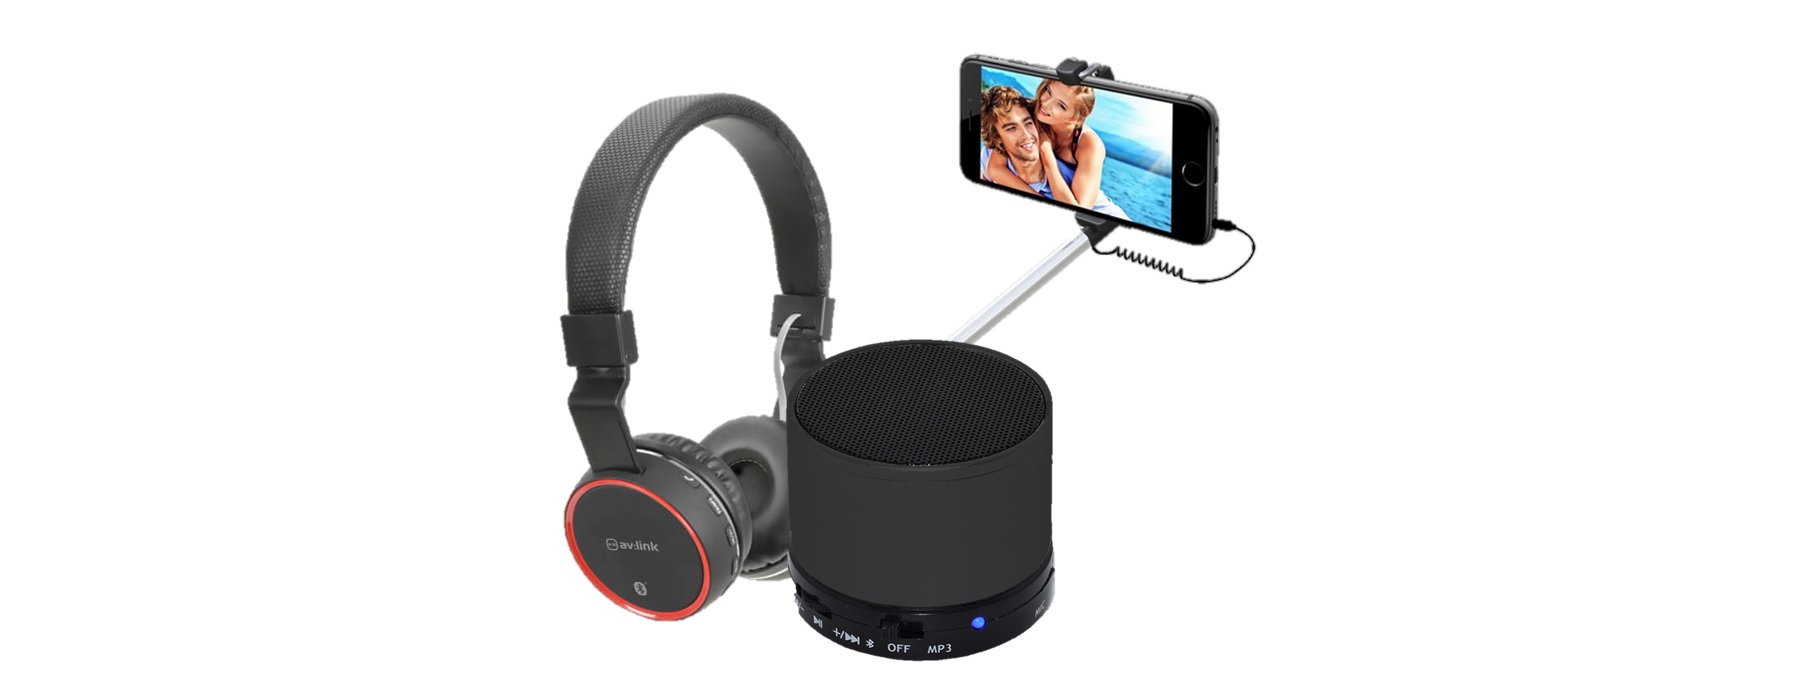 Some of the best on the go tech gadgets including wireless headphones, a selfie stick and a portable bluetooth speaker.